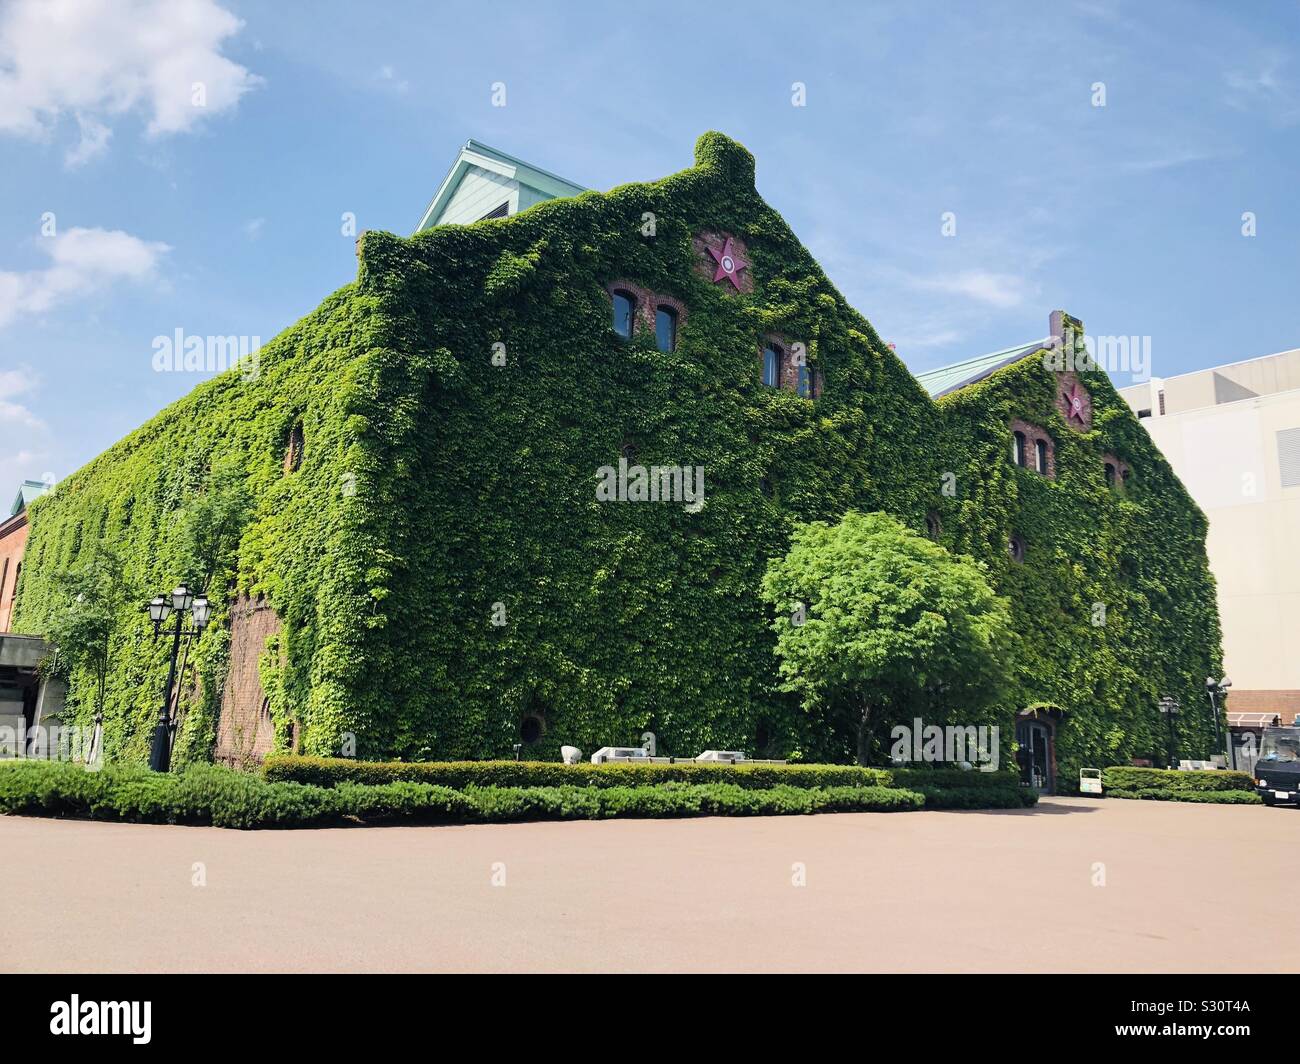 House covered in vines Stock Photo